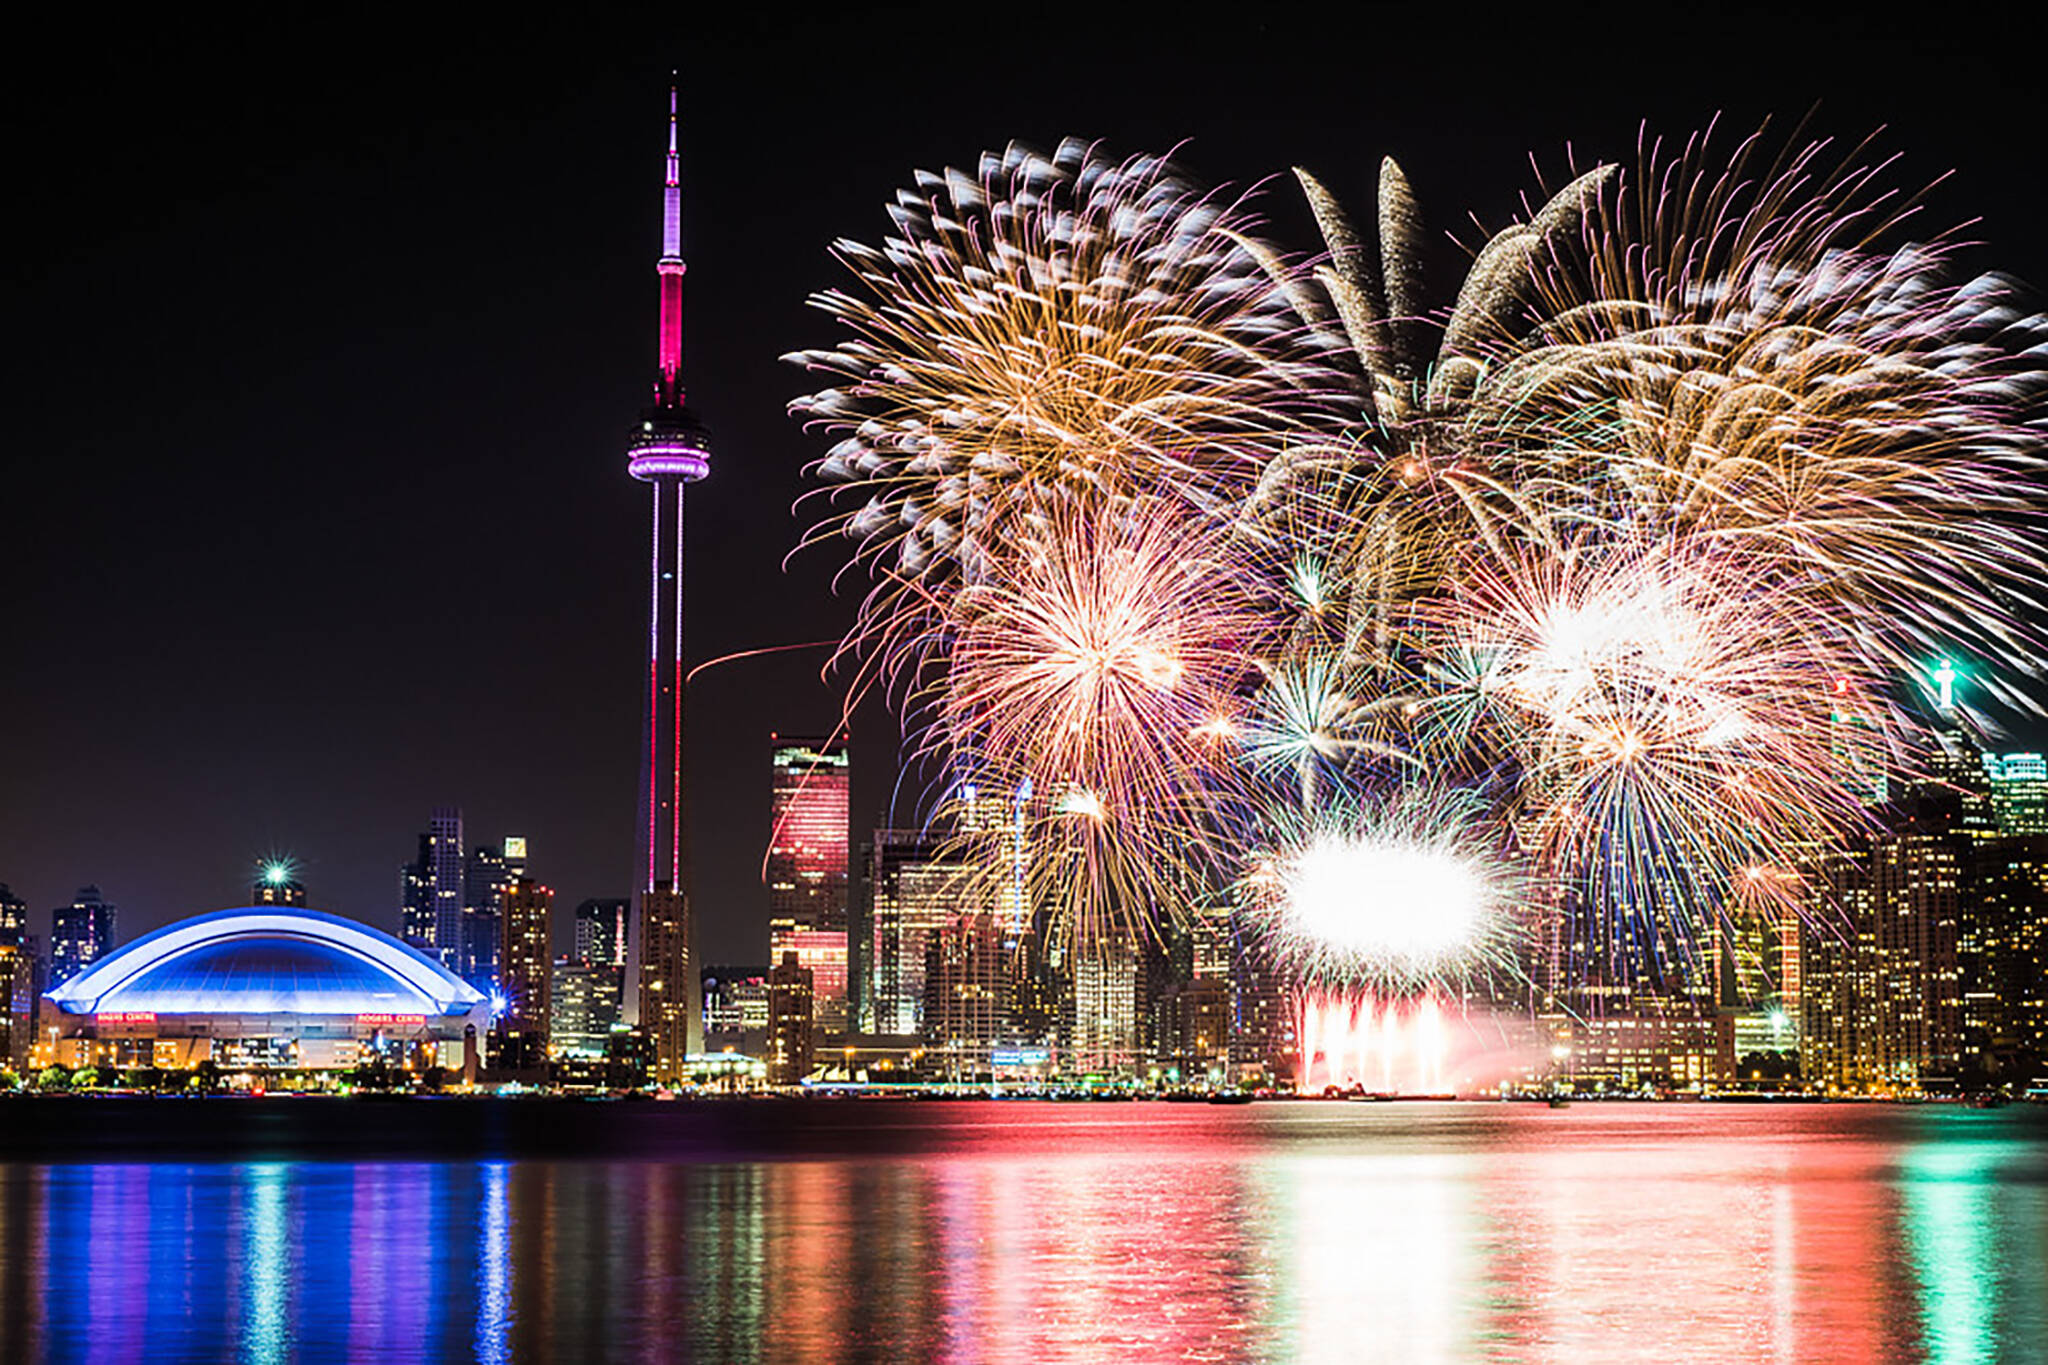 Here's what is going on with New Year's Eve fireworks in Toronto to